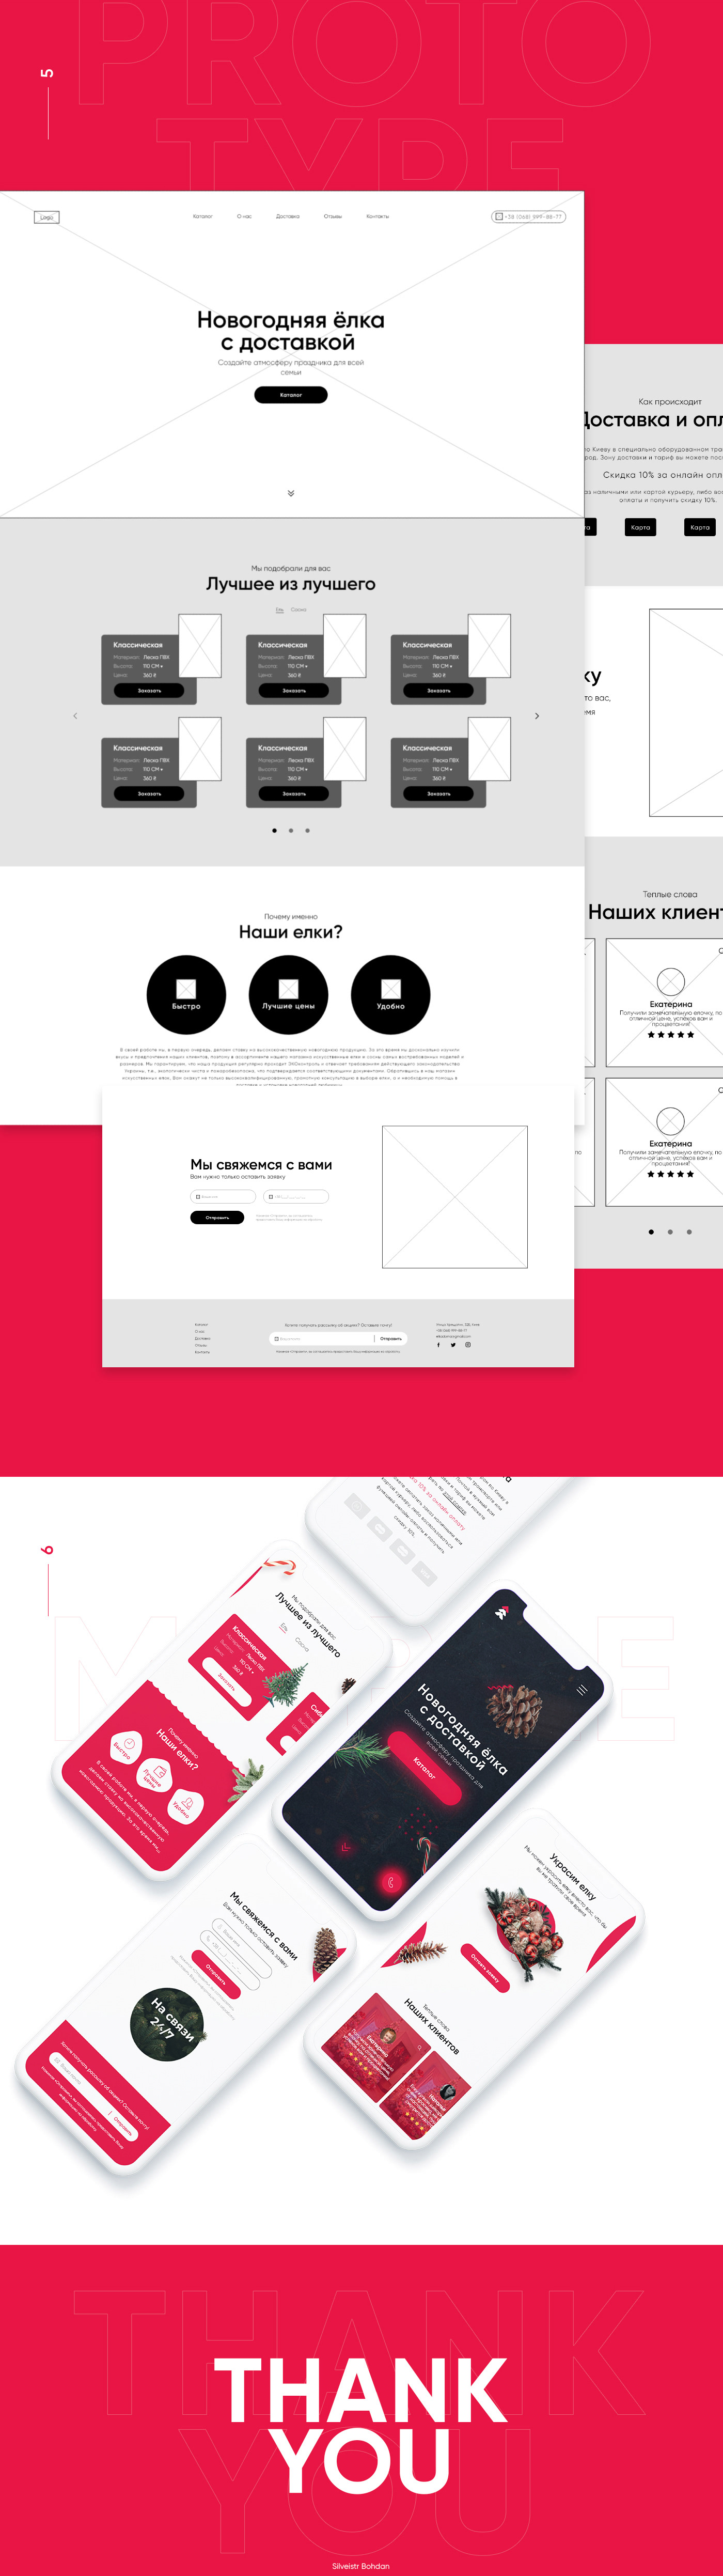 UI ux Interface Christmas decorations Website design landing page red White